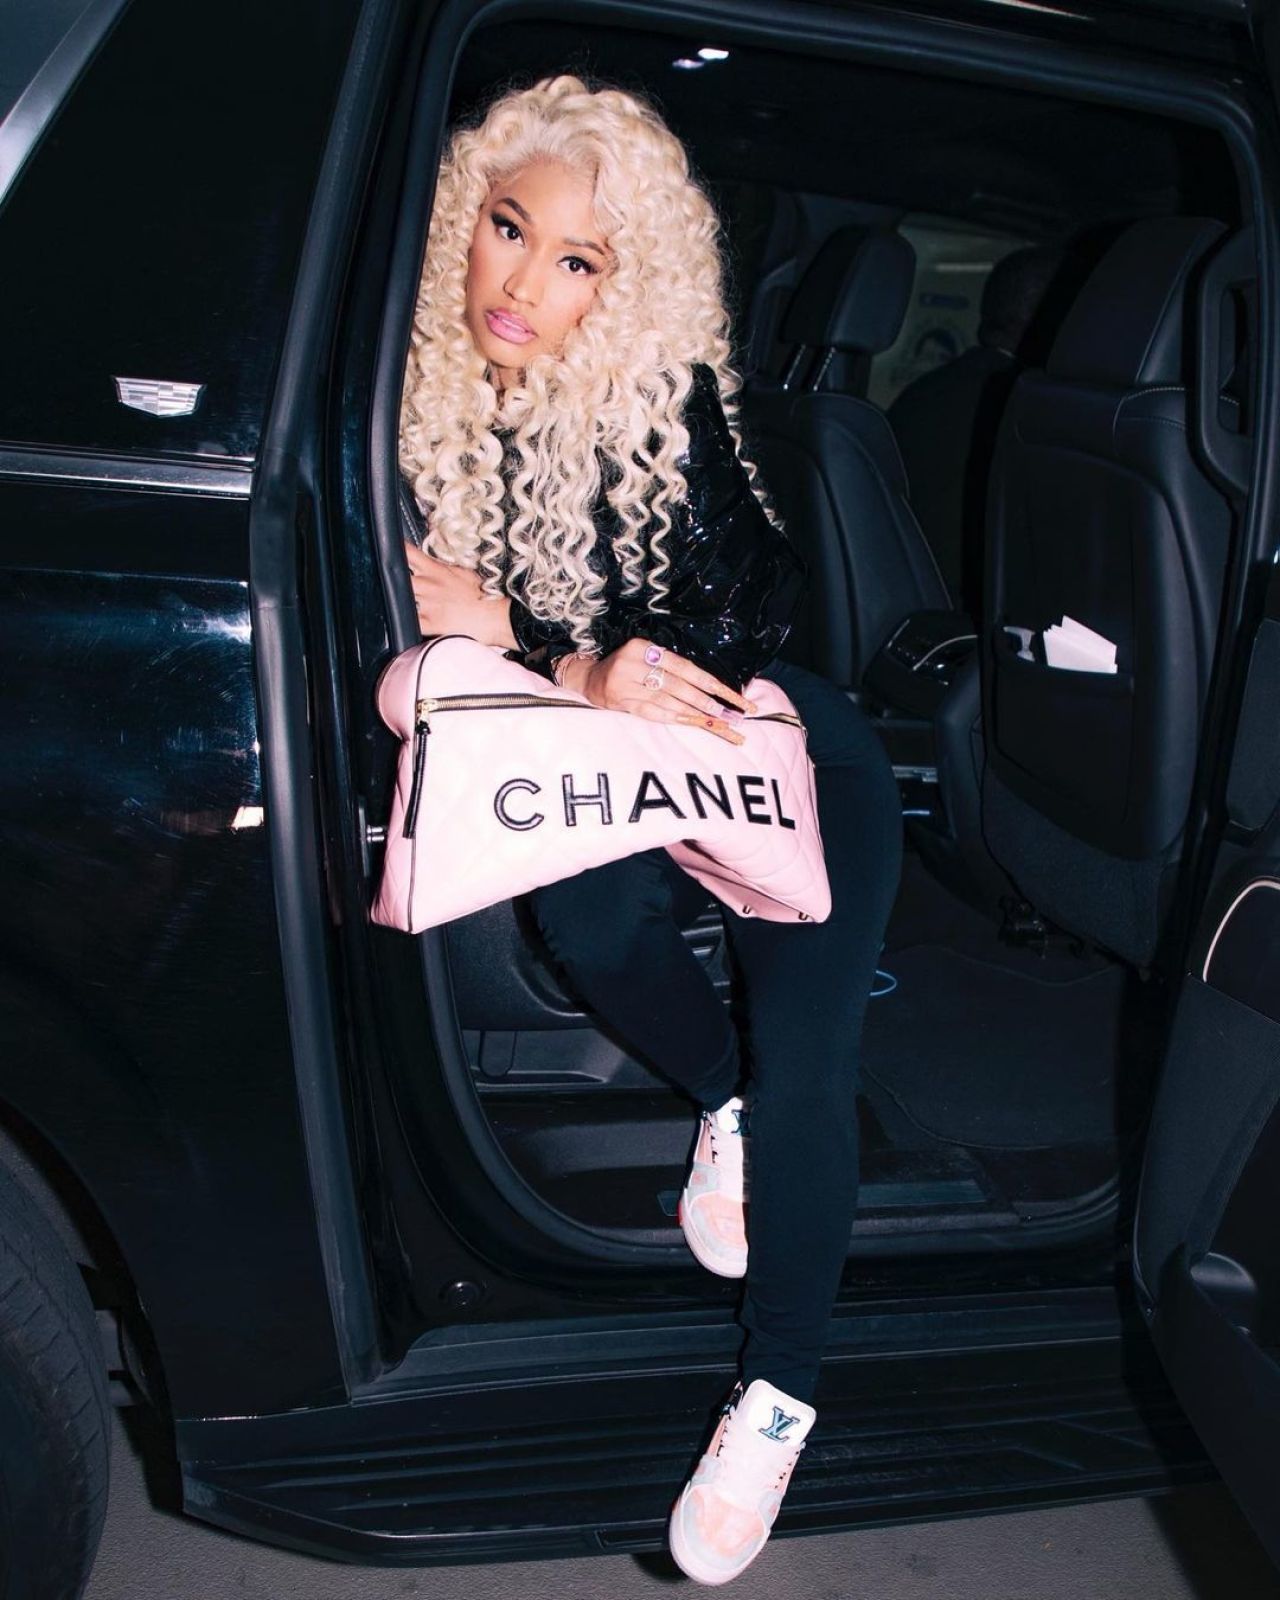 Nicki Minaj spotted in black outfit with CHANEL bag 1